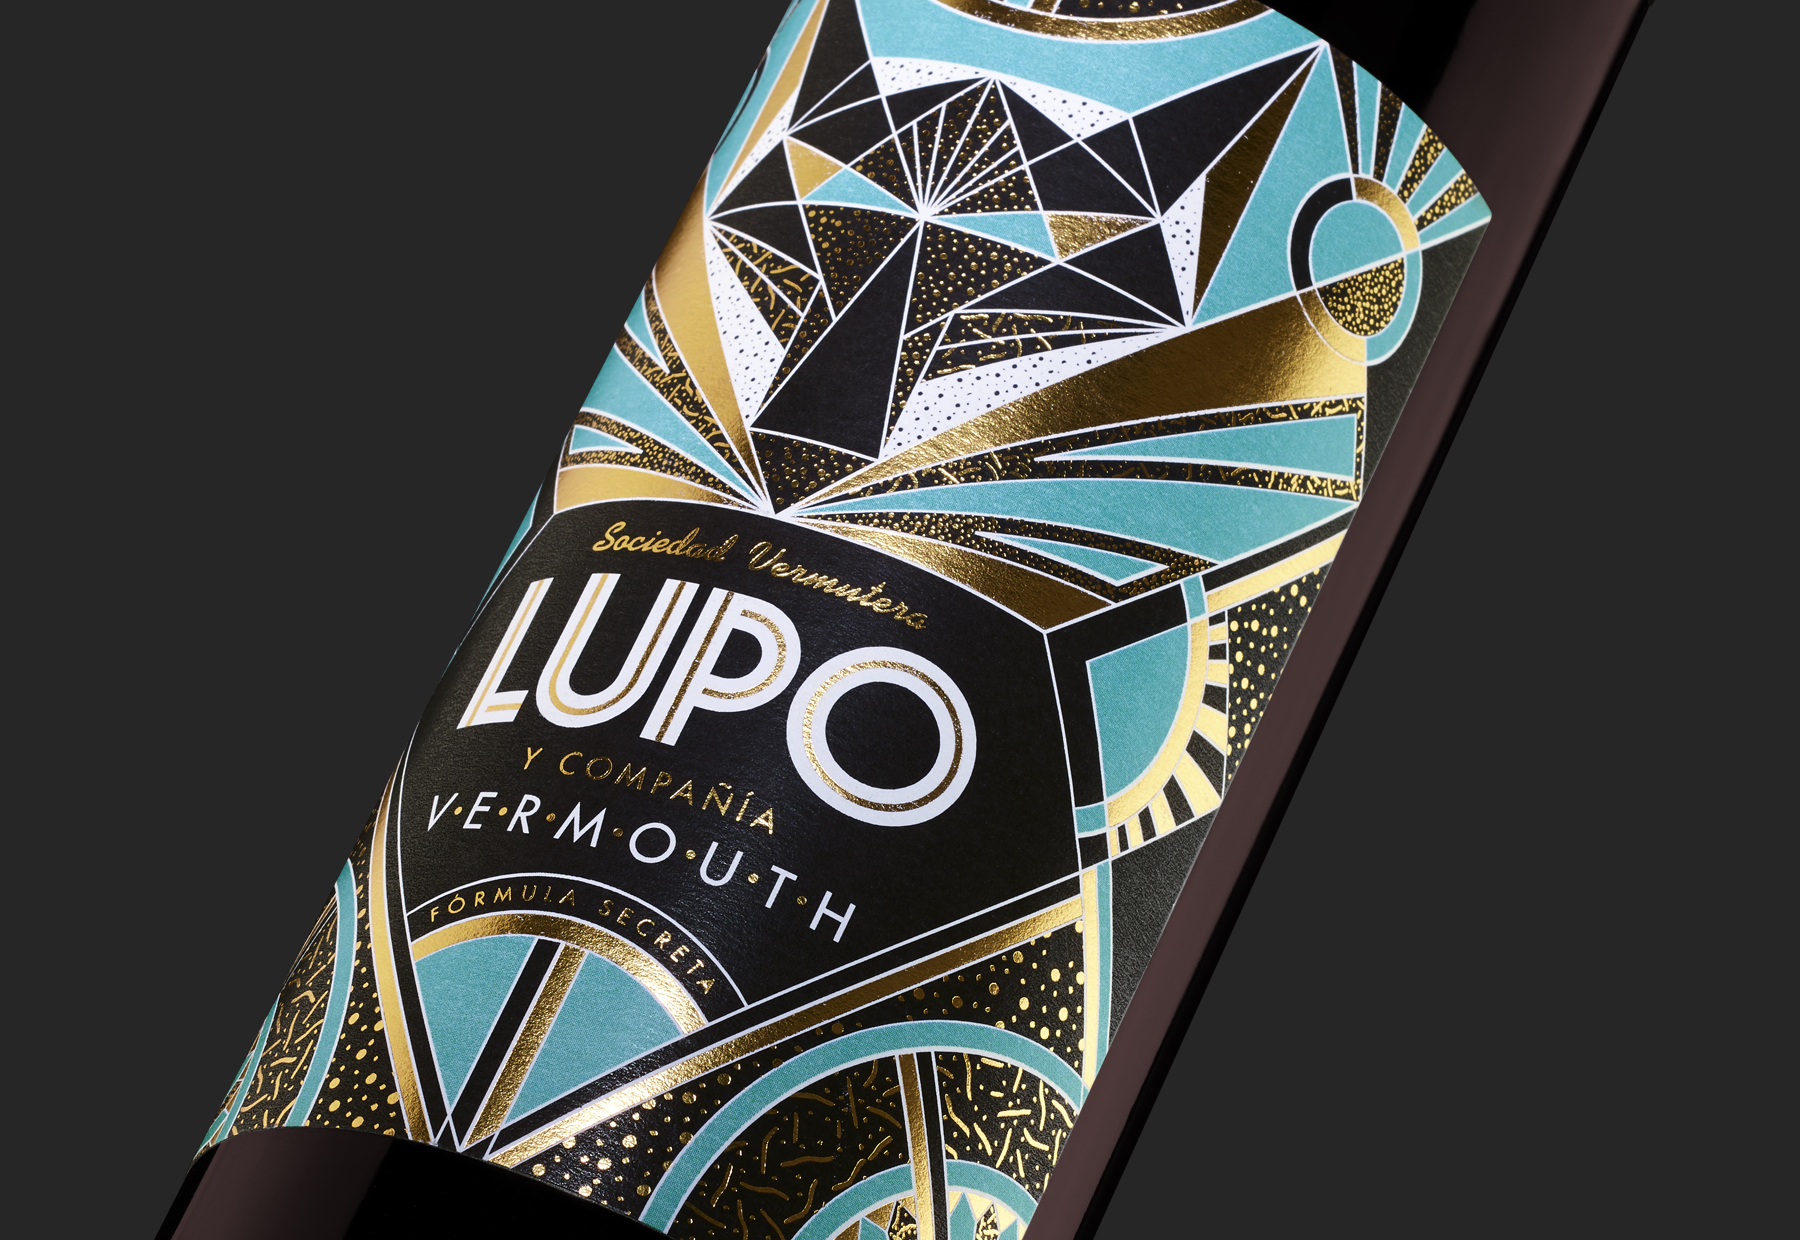 Vermouth Packaging Design for Sociedad Vermutera Lupo